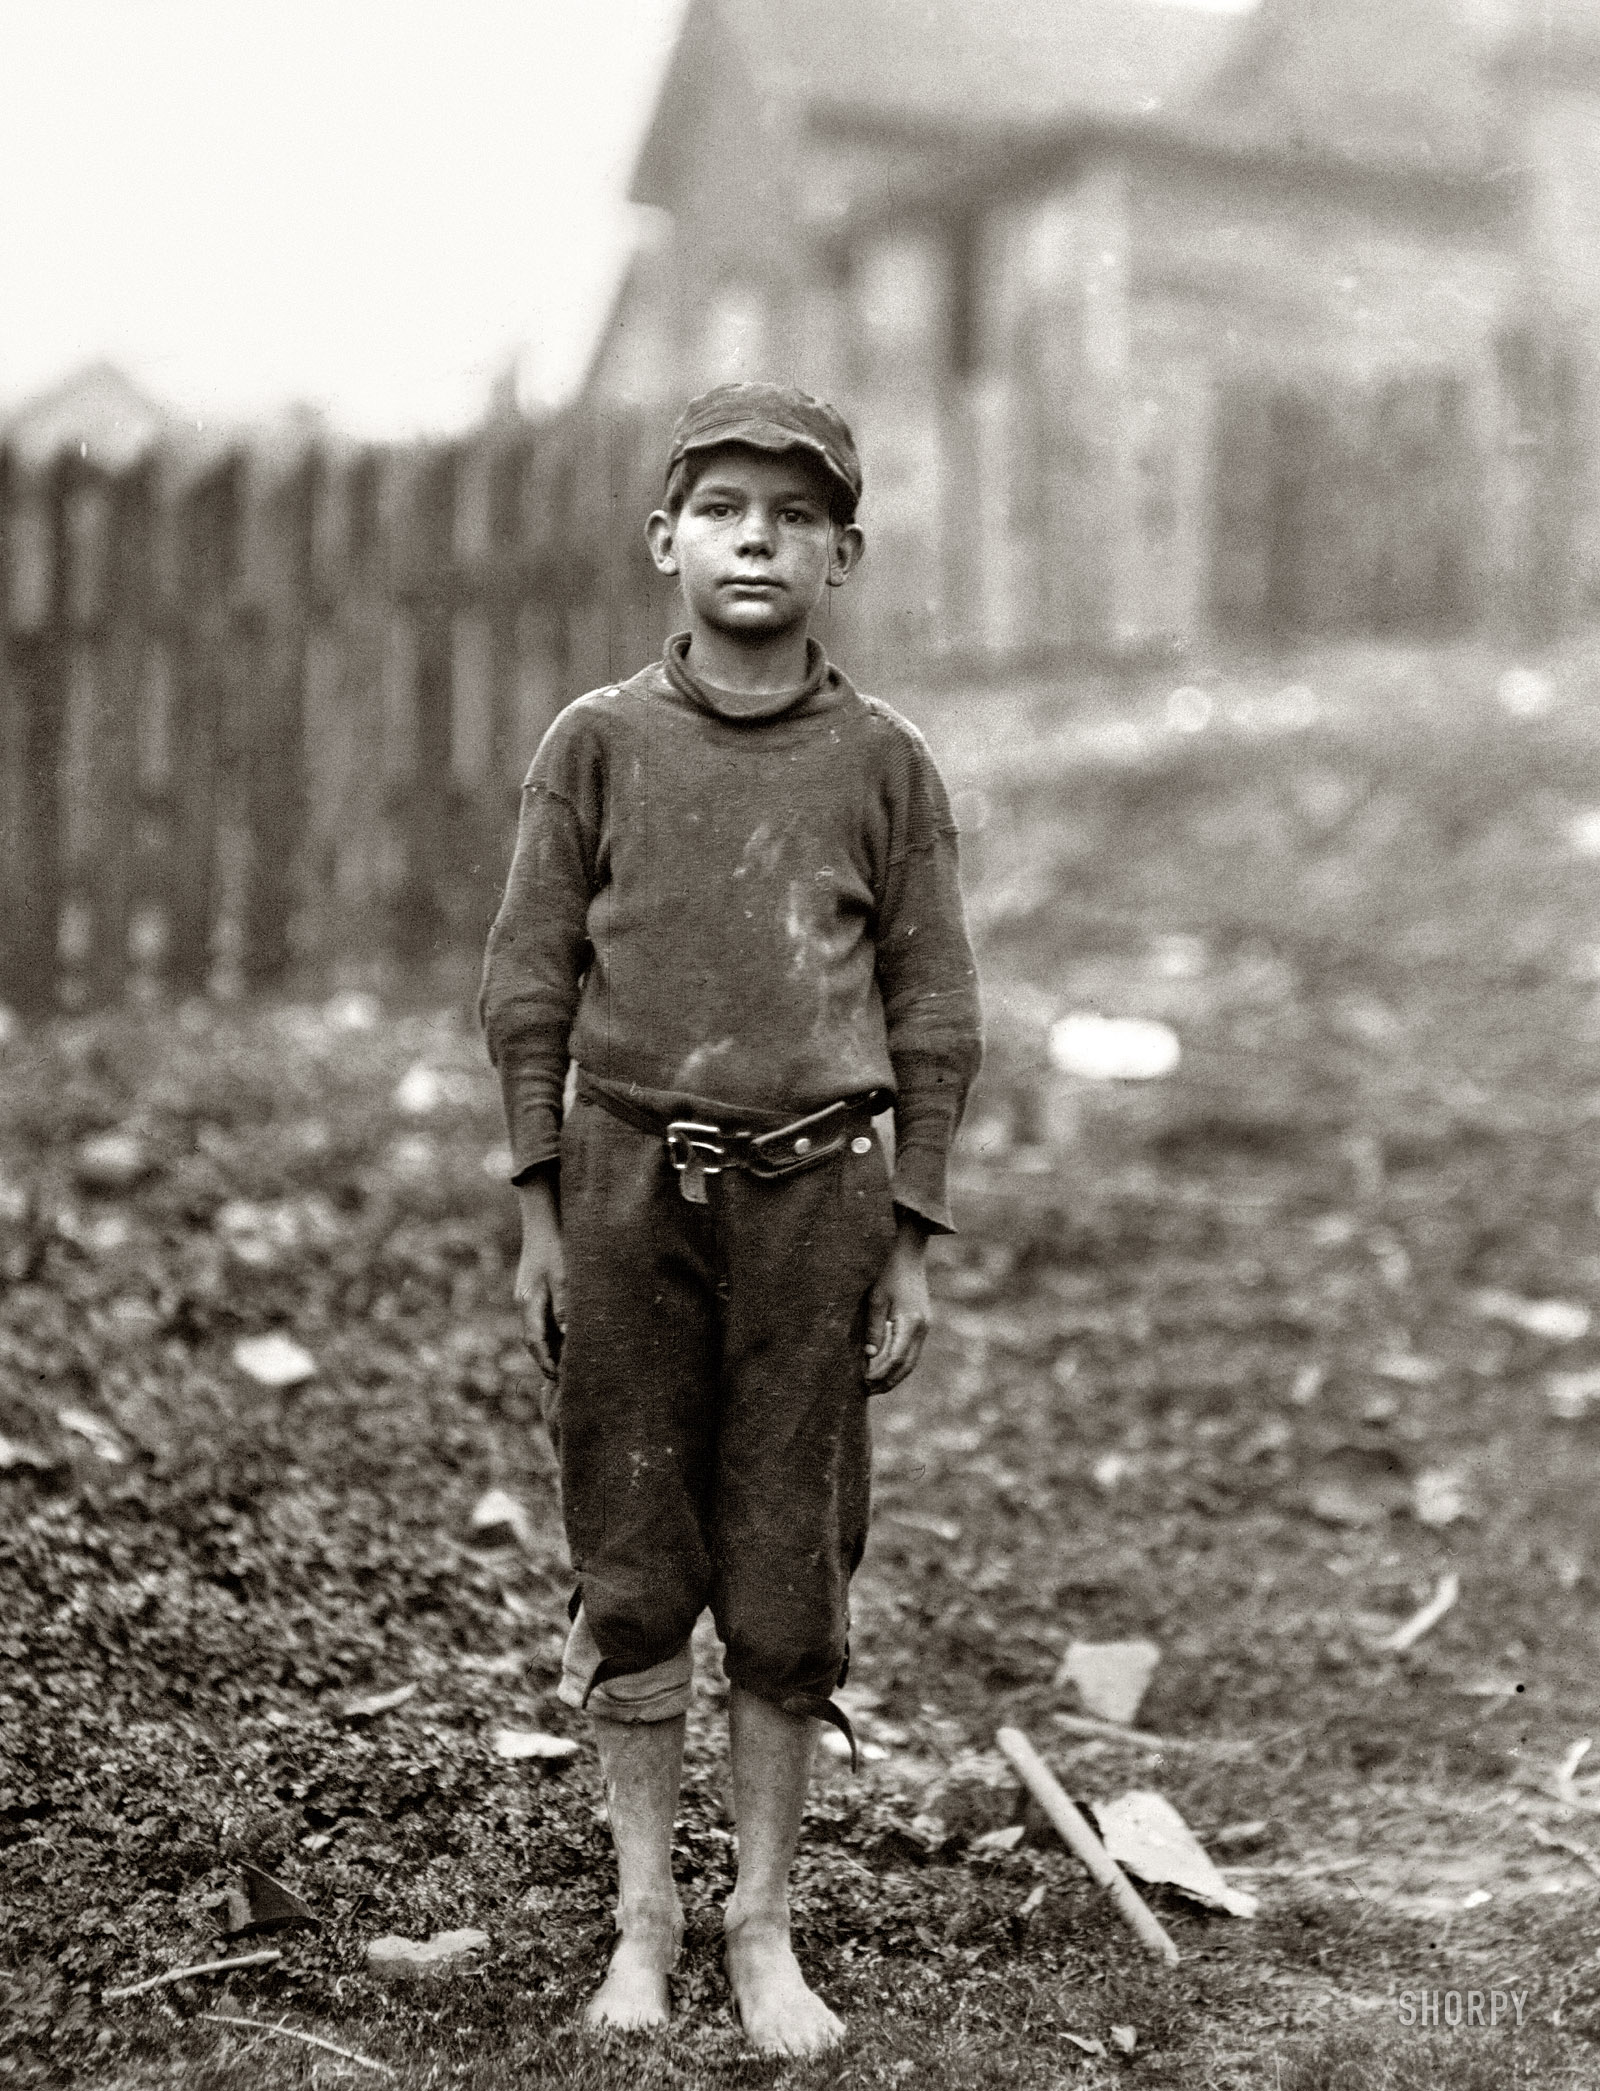 April 1913. Rome, Georgia. Neil Power, 10 years old. Said "turns stockings in Rome Hosiery Mill." A shy, pathetic figure. "Hain't been to school much." Photo and caption by Lewis Wickes Hine. View full size.